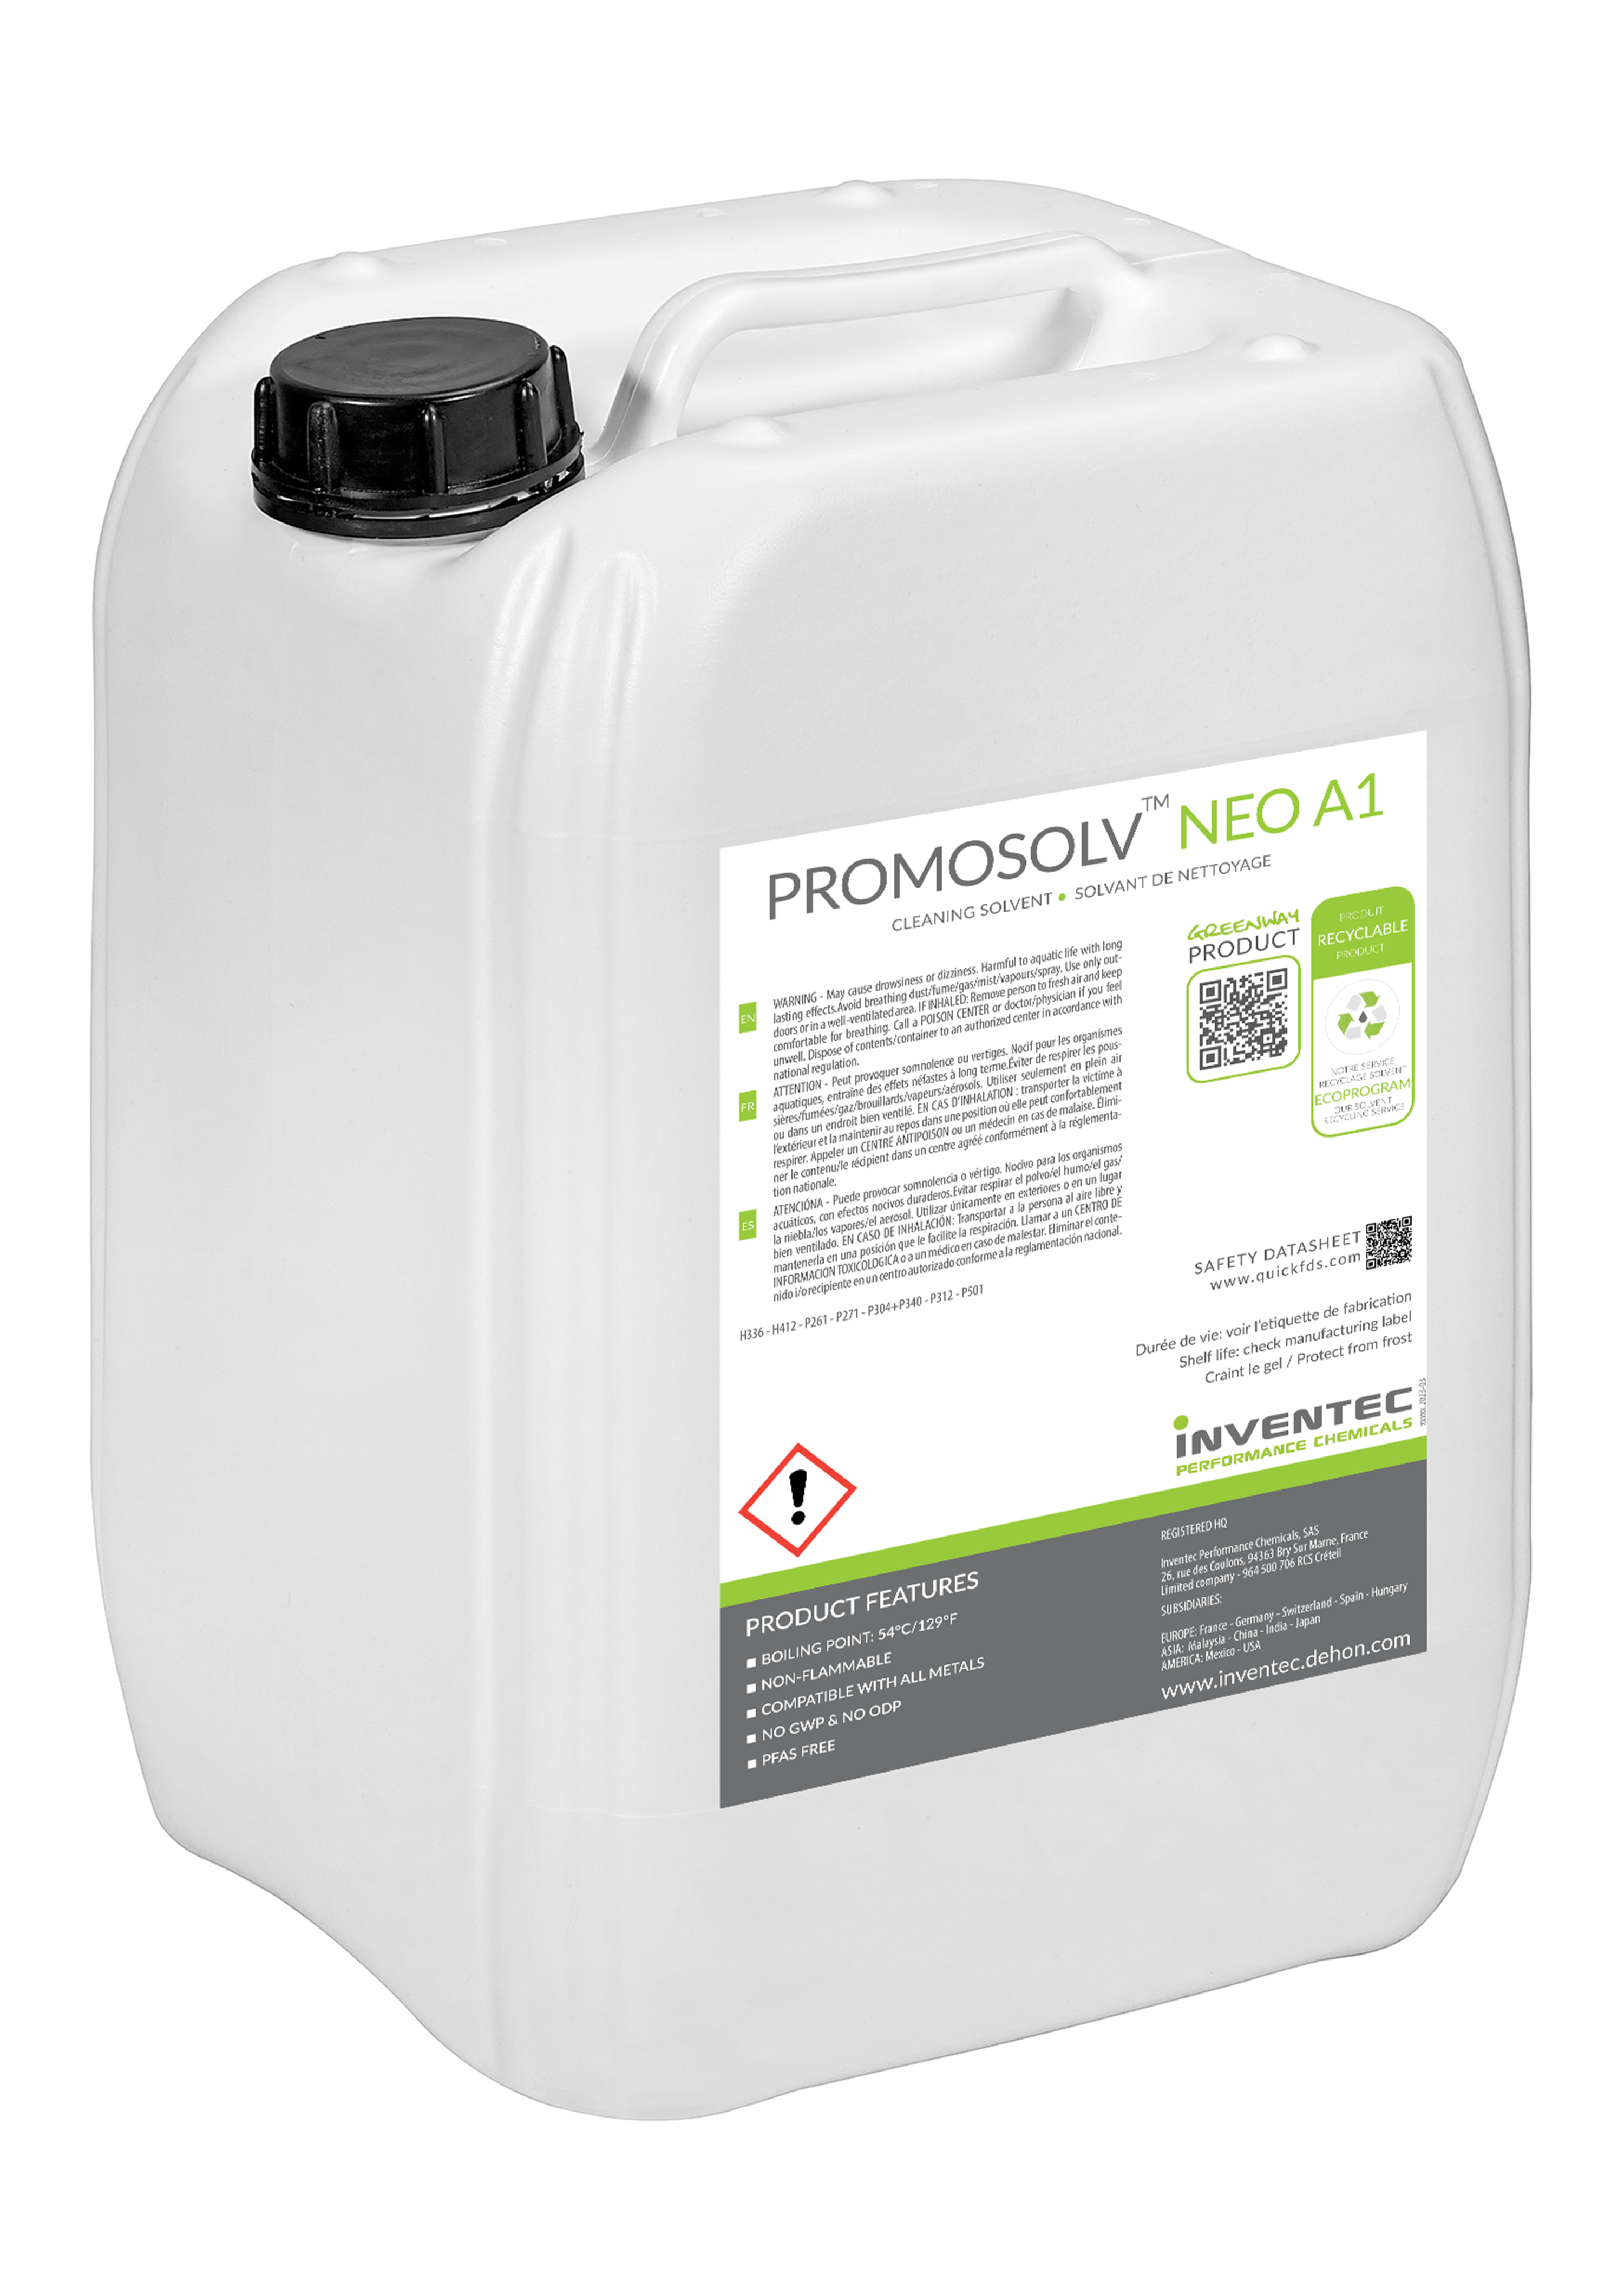 PROMOSOLV™ NEO A1 (PFAS FREE CLEANING SOLVENT)